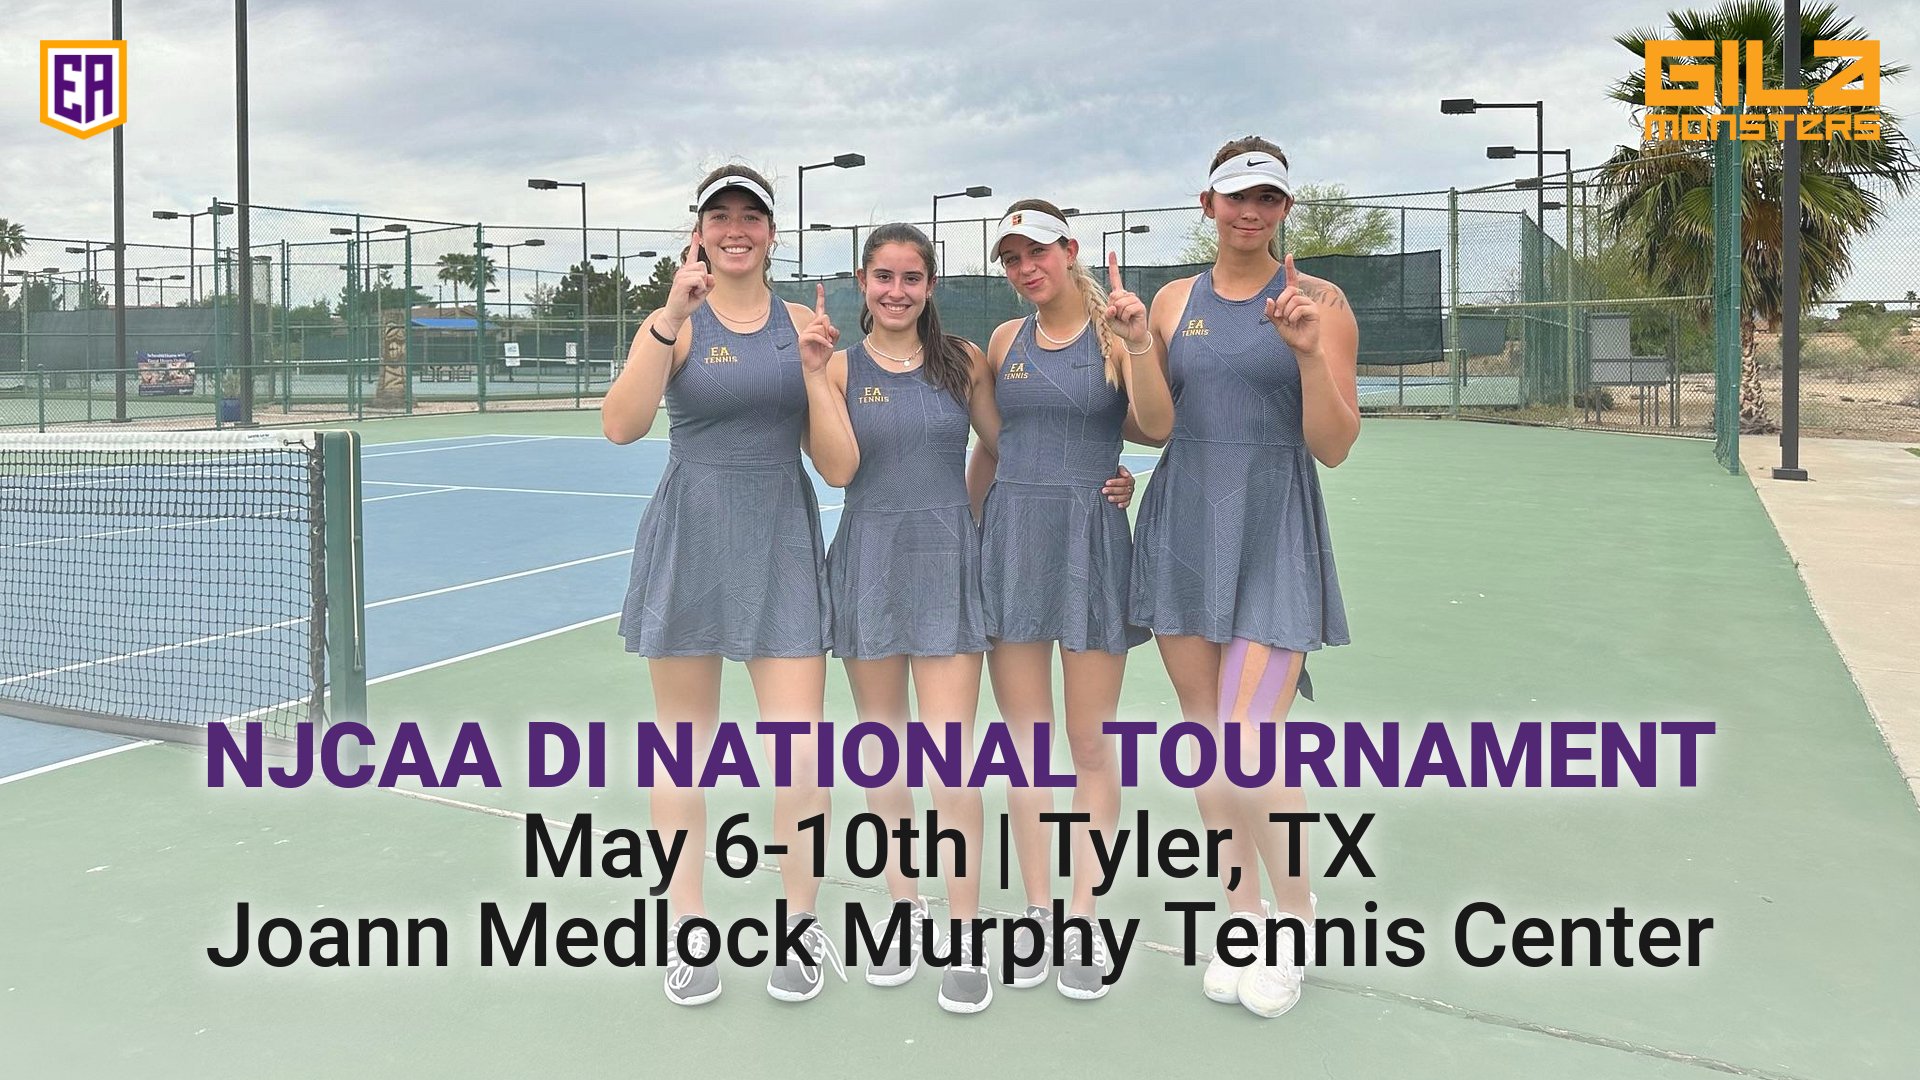 Tennis Heads to Tyler, TX for National Tournament